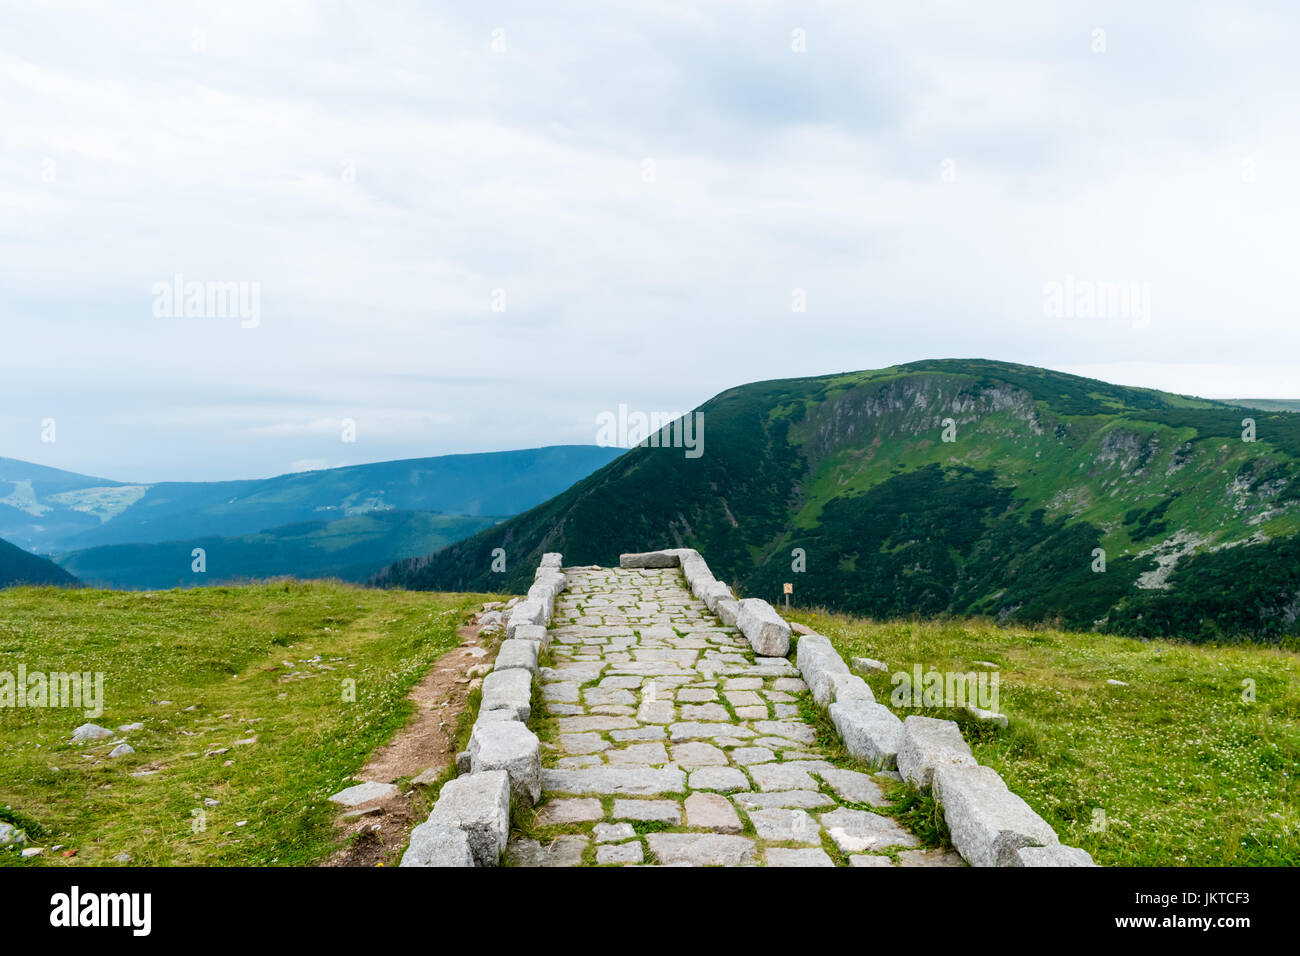 The ridges of Krkonose National Park, the view of the valley. Stock Photo